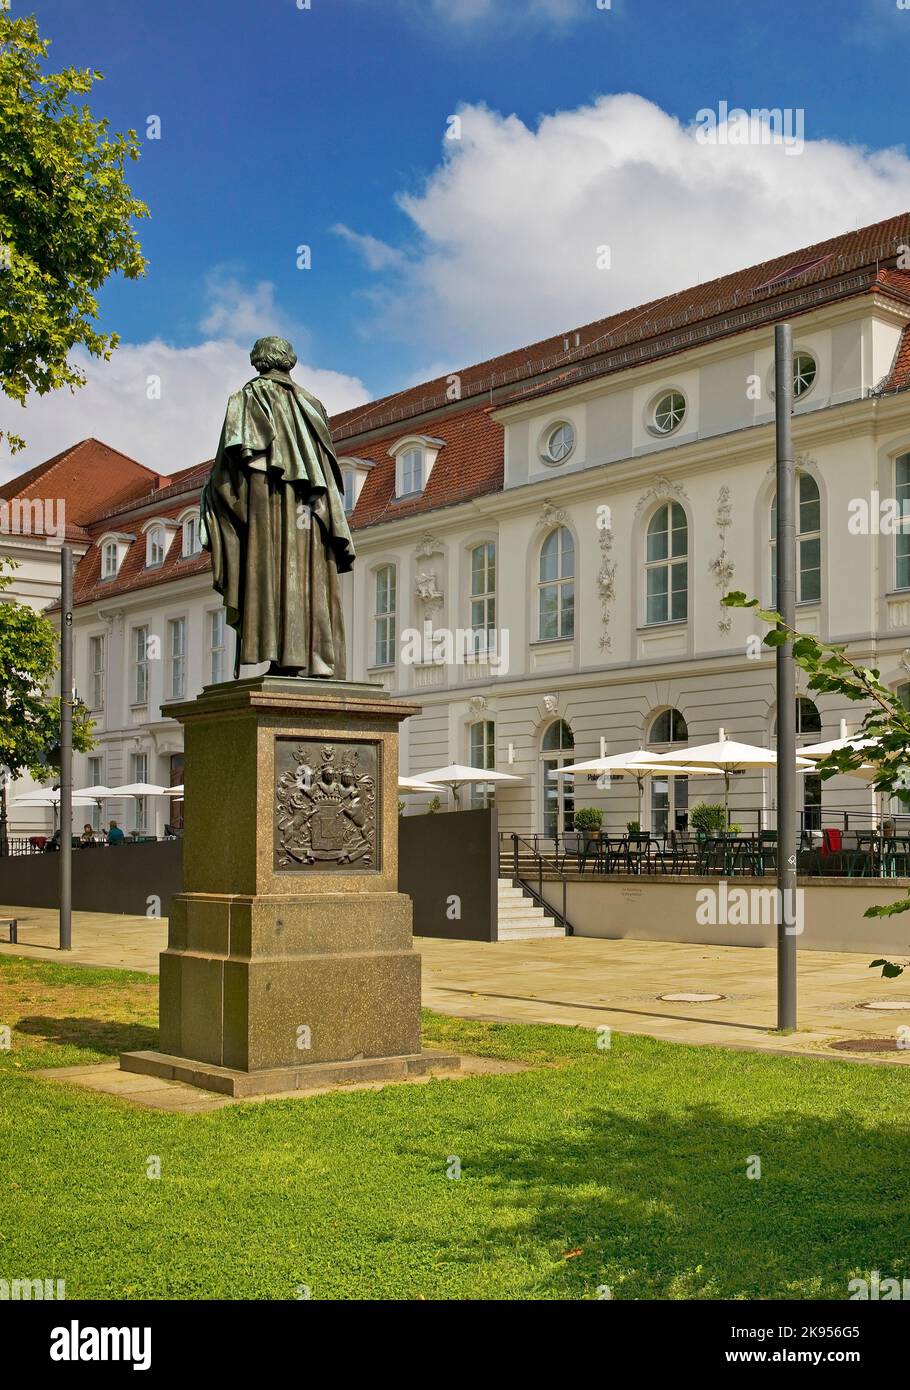 Palais Populaire, international forum of arts and culture at the historic Prinzessinnenpalais (Princesses' Palace) with York Memorial, Germany, Berlin Stock Photo